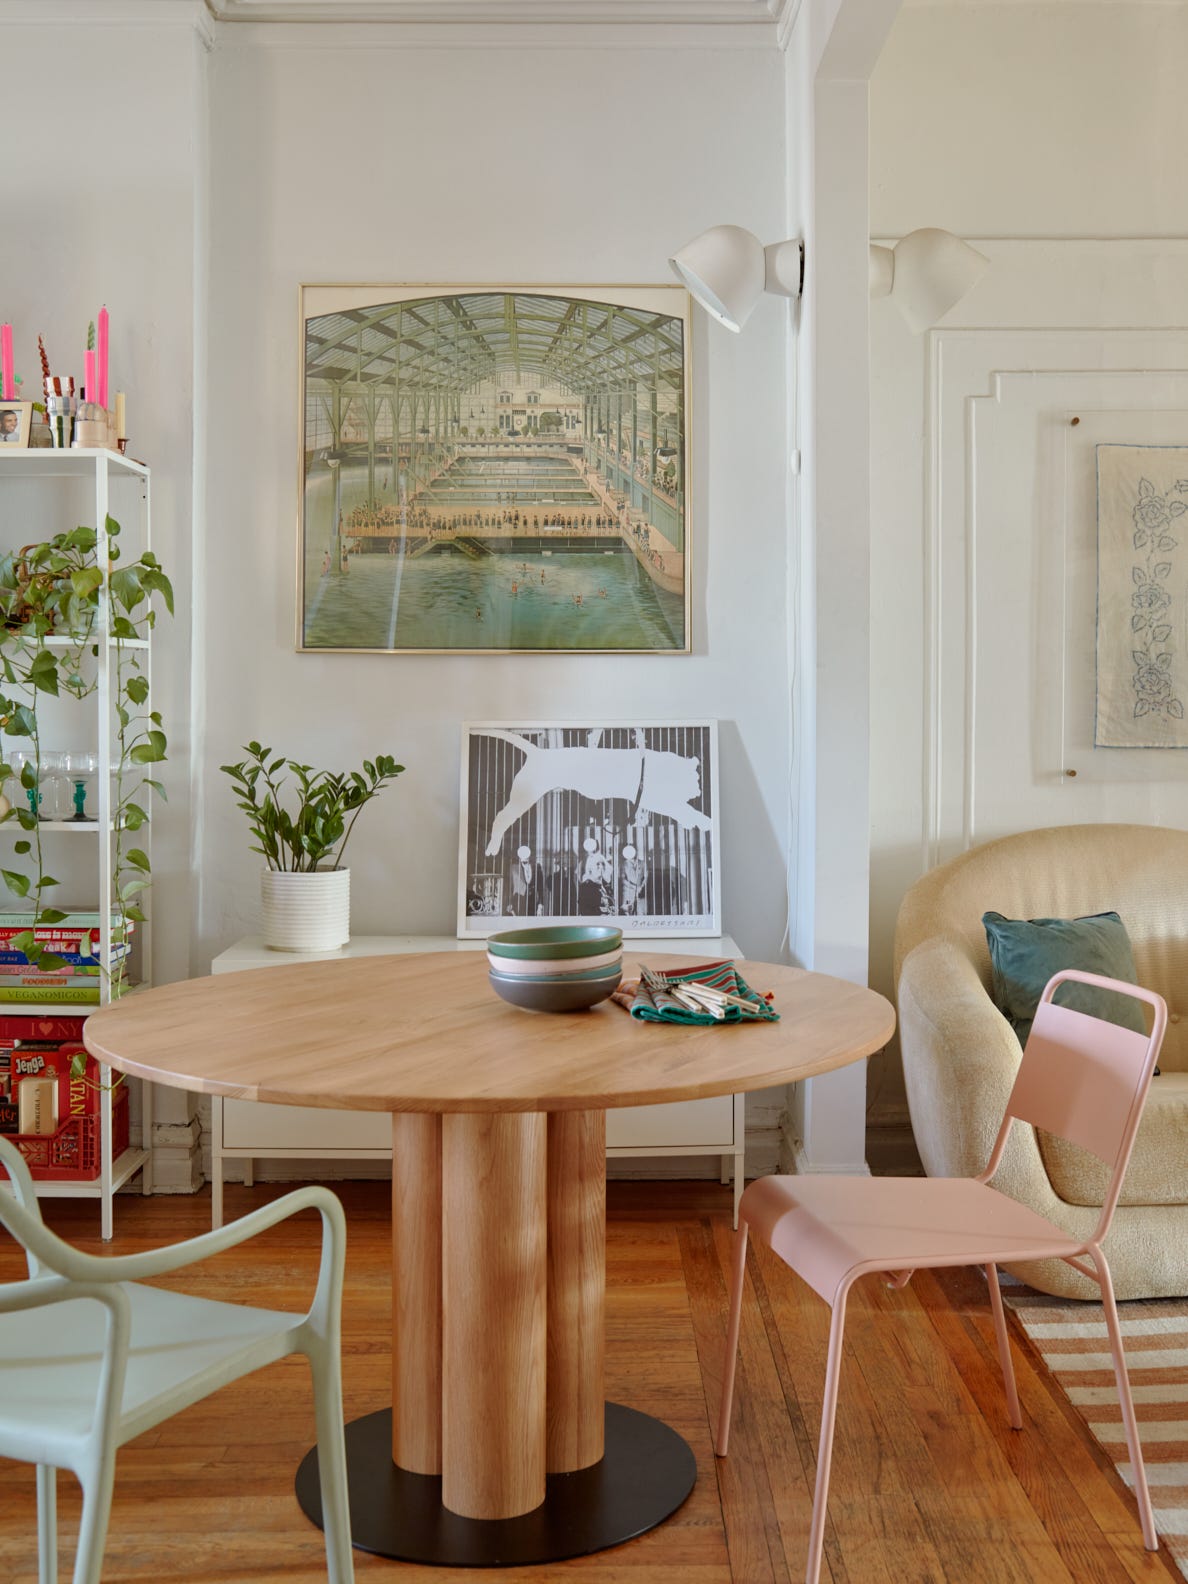 Dining room with wooden pedestal table and pink chair